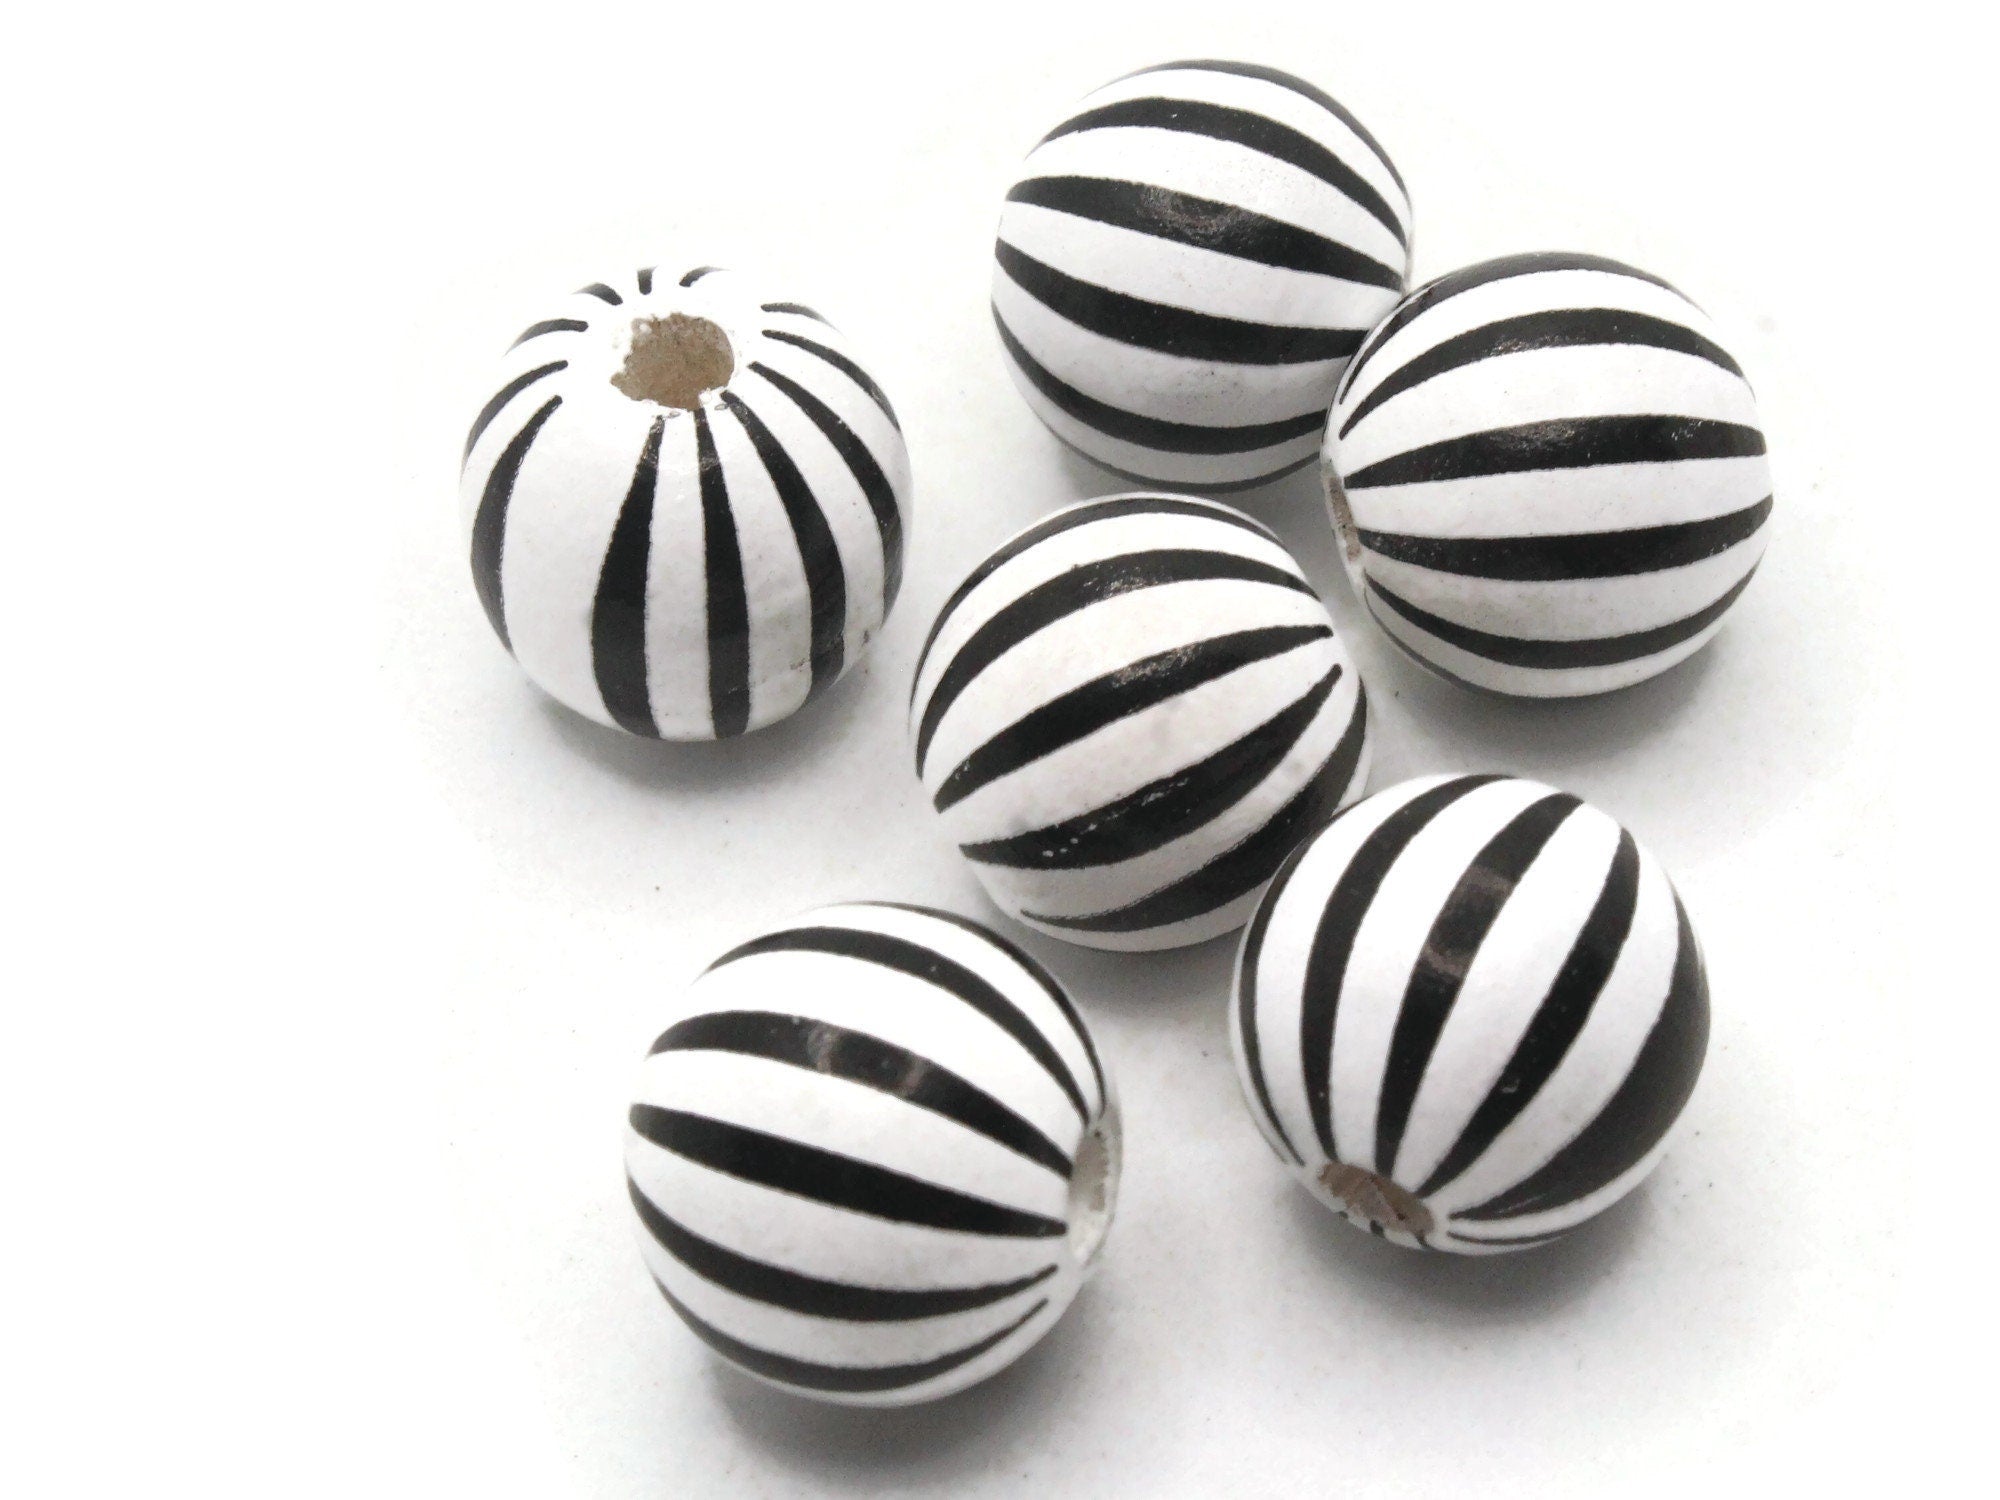 6 15mm Black and White Striped Round Wood Beads by Smileyboy Beads | Michaels